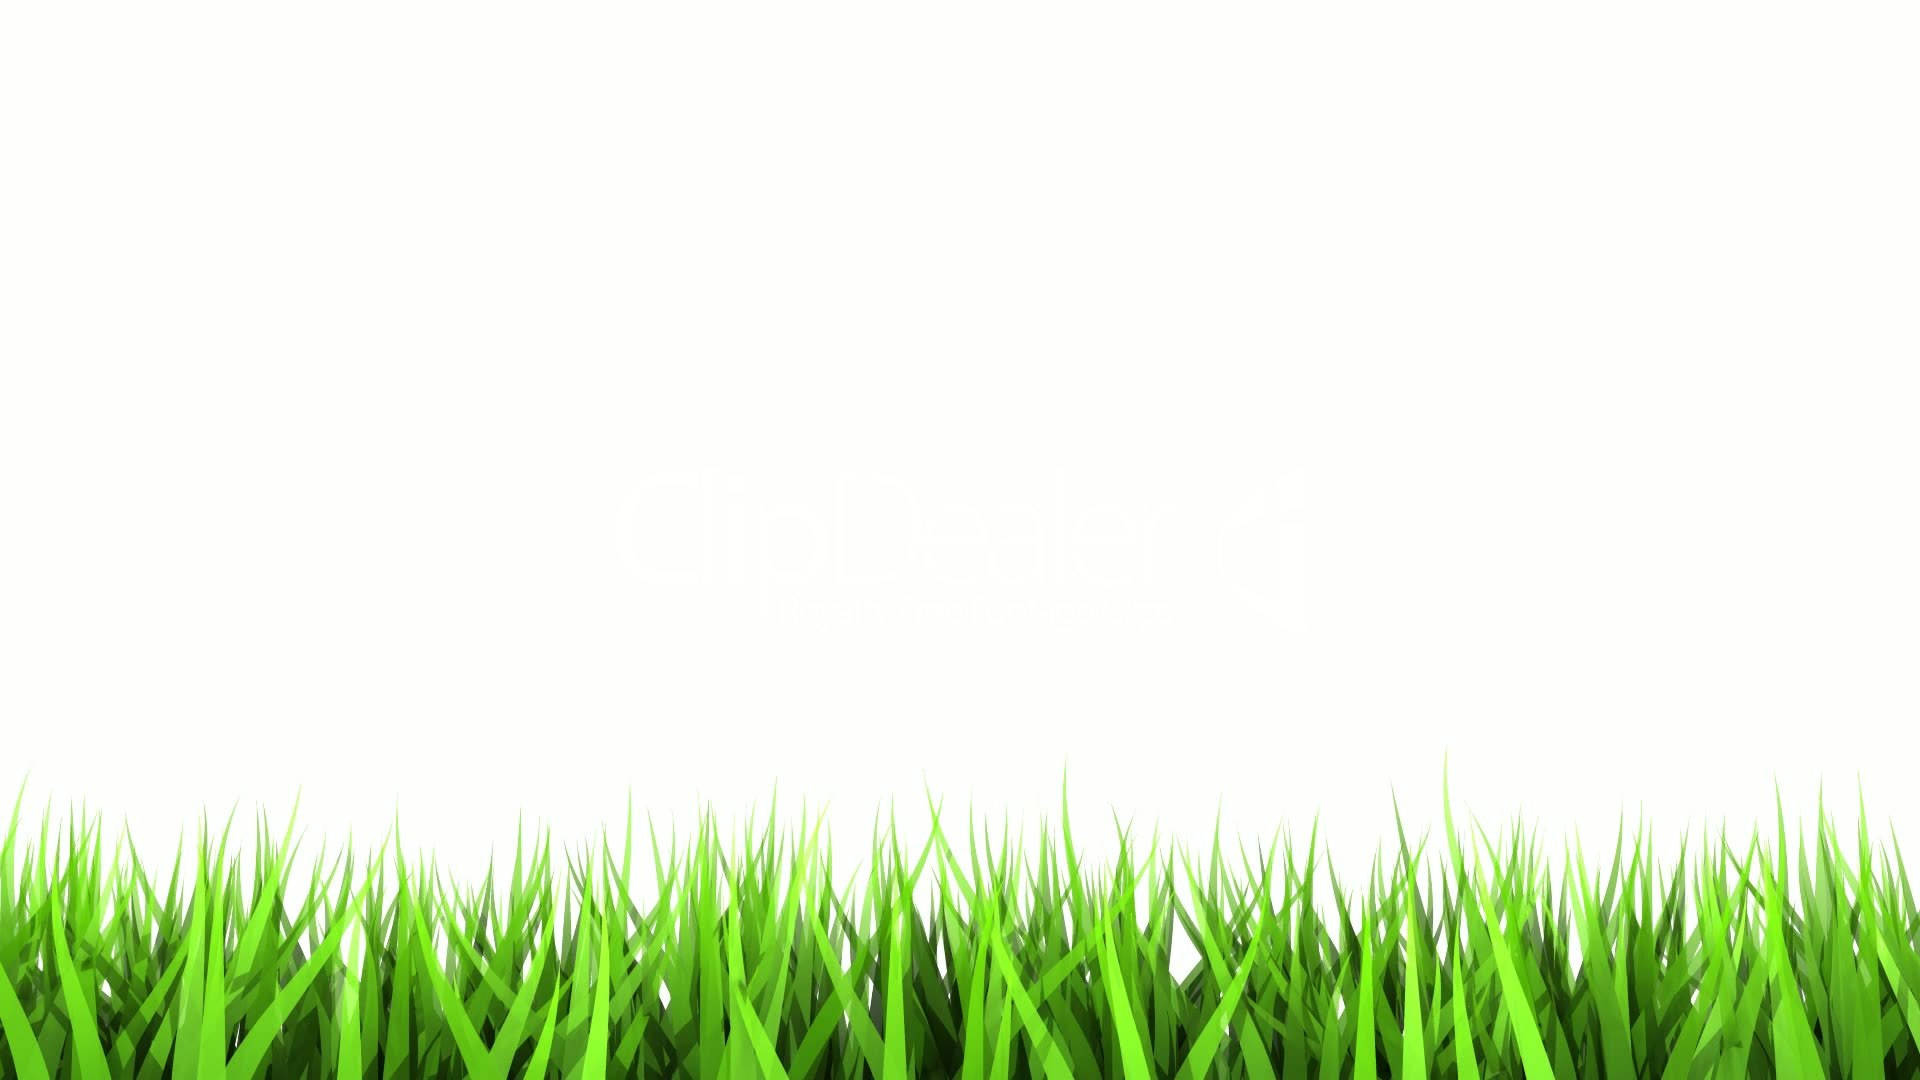 Cool White Over Grass Background